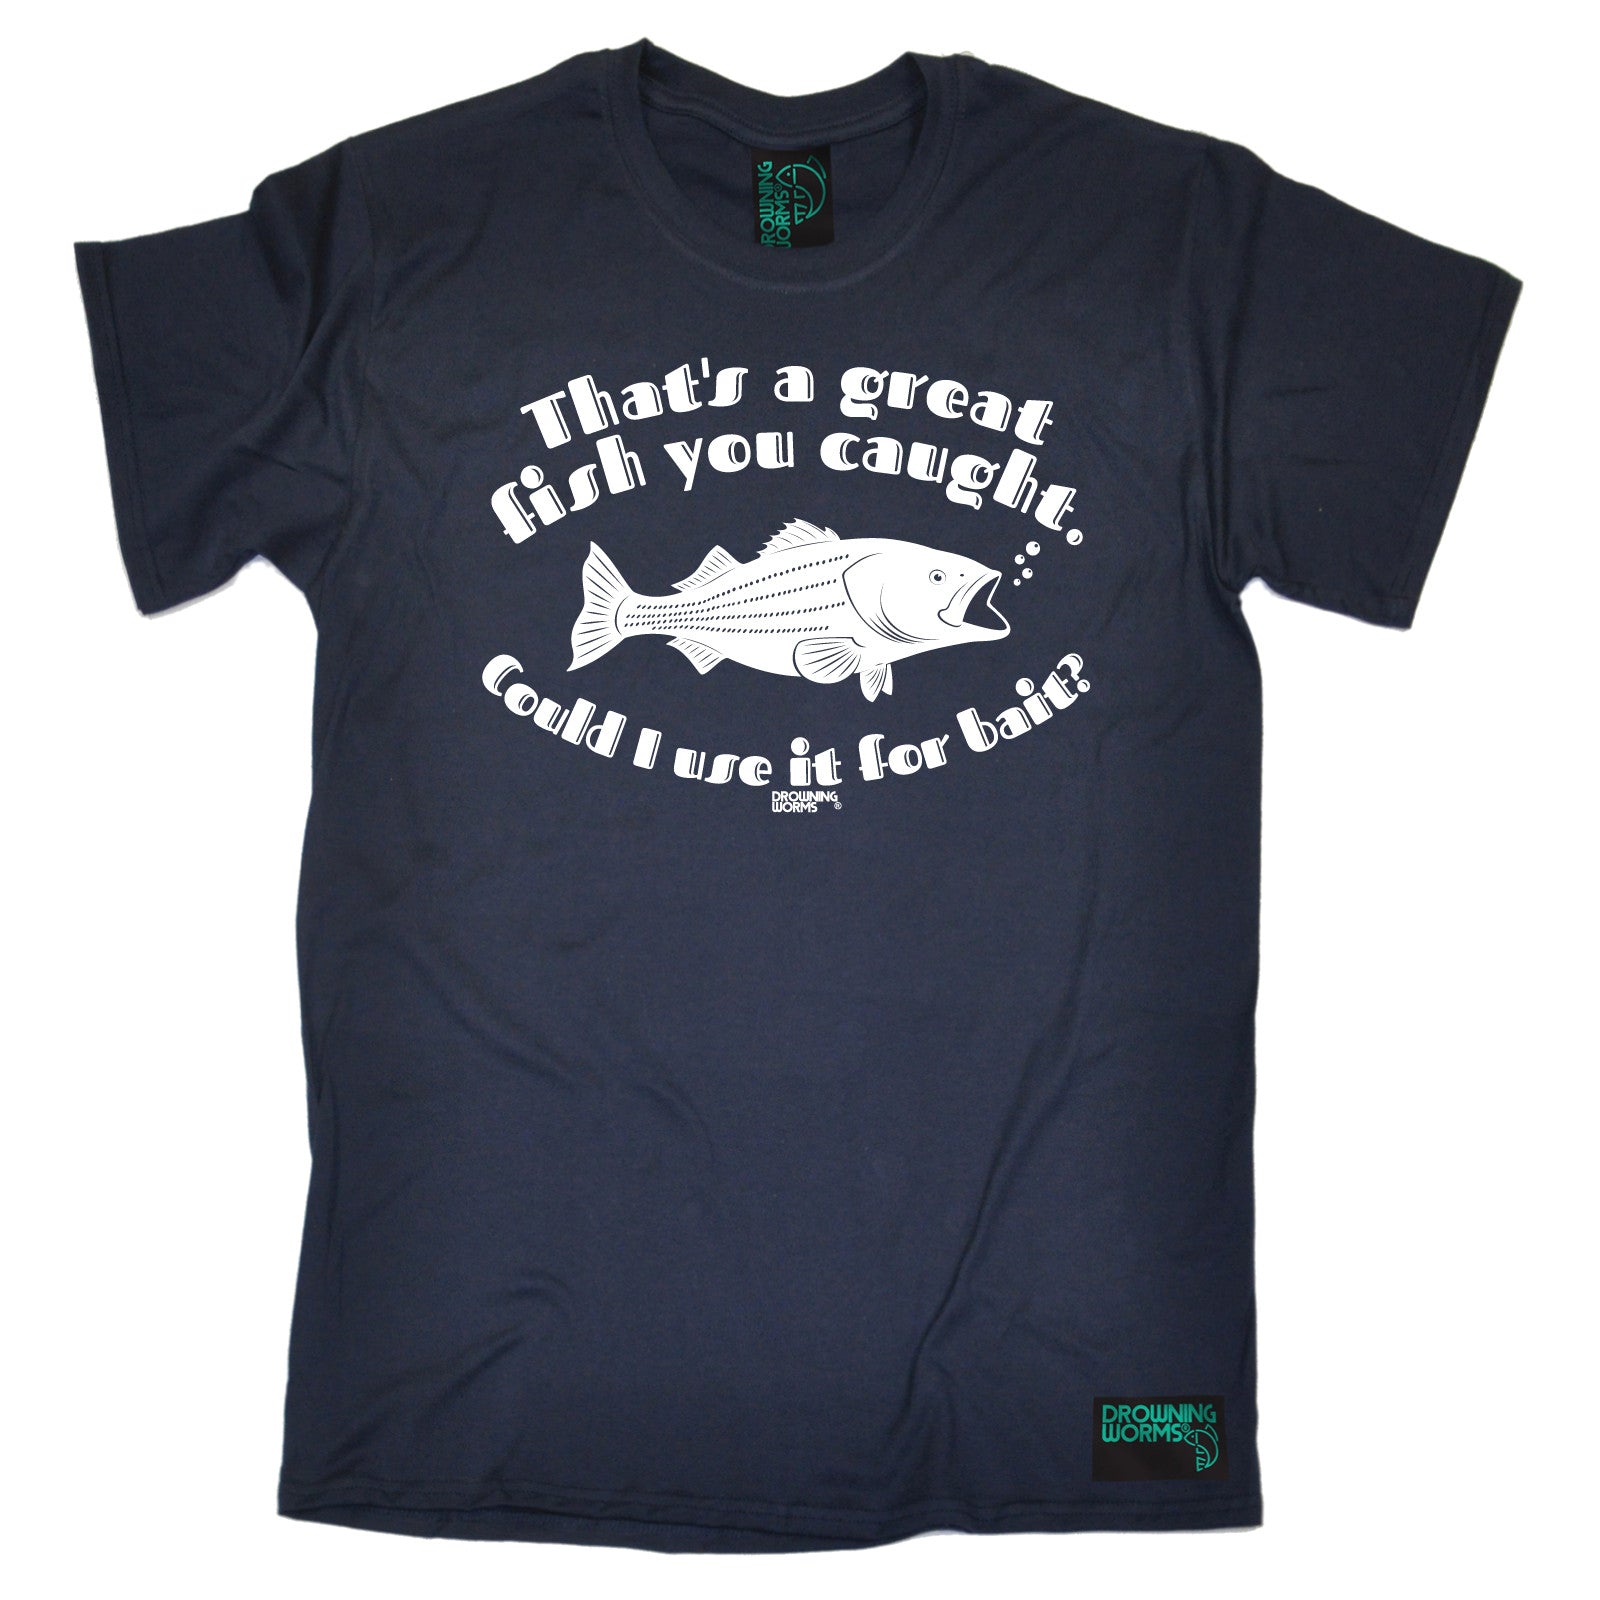 Thats A Nice Fish Your Caught Can I Use For Bait Joke Shirt-CL